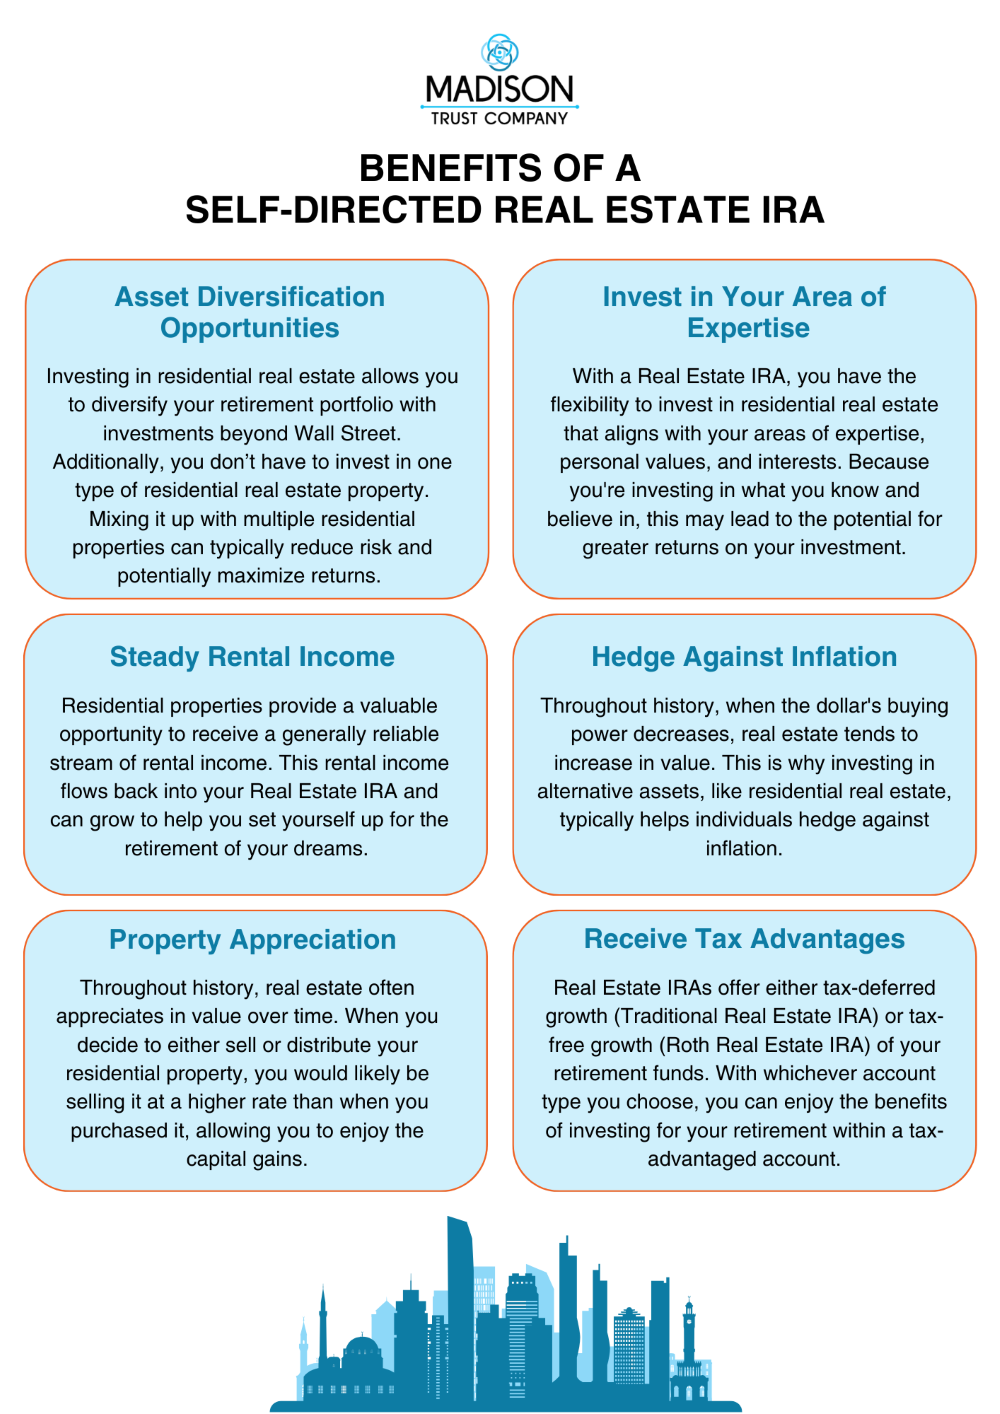 Benefits of a Self-Directed Real Estate IRA Infographic: (1) Asset Diversification Opportunities - Investing in residential real estate allows you to diversify your retirement portfolio with investments beyond Wall Street. Additionally, you don’t have to invest in one type of residential real estate property. Mixing it up with multiple residential properties can typically reduce risk and potentially maximize returns. (2) Receive Tax Advantages - Real Estate IRAs offer either tax-deferred growth (Traditional Real Estate IRA) or tax-free growth (Roth Real Estate IRA) of your retirement funds. With whichever account type you choose, you can enjoy the benefits of investing for your retirement within a tax-advantaged account. (3) Steady Rental Income - Residential properties provide a valuable opportunity to receive a generally reliable stream of rental income. This rental income flows back into your Real Estate IRA and can grow to help you set yourself up for the retirement of your dreams. (4) Hedge Against Inflation - Throughout history, when the dollar's buying power decreases, real estate tends to increase in value. This is why investing in alternative assets, like residential real estate, typically helps individuals hedge against inflation. (5) Invest in Your Area of Expertise - With a Real Estate IRA, you have the flexibility to invest in residential real estate that aligns with your areas of expertise, personal values, and interests. Because you're investing in what you know and believe in, this may lead to the potential for greater returns on your investment. (6) Property Appreciation - Throughout history, real estate often appreciates in value over time. When you decide to either sell or distribute your residential property, you would likely be selling it at a higher rate than when you purchased it, allowing you to enjoy the capital gains.